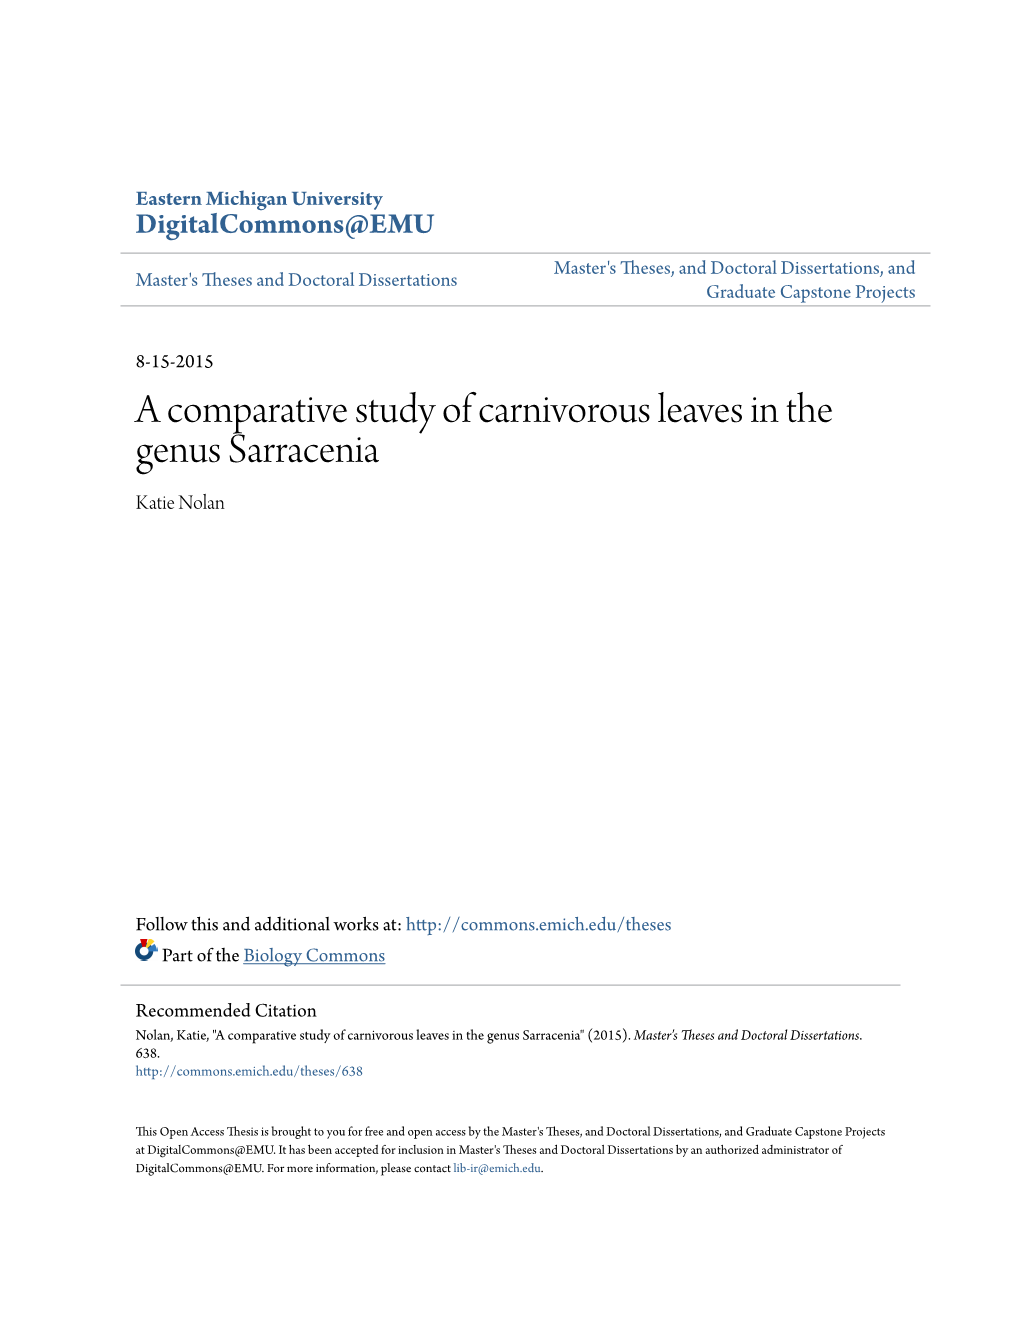 A Comparative Study of Carnivorous Leaves in the Genus Sarracenia Katie Nolan